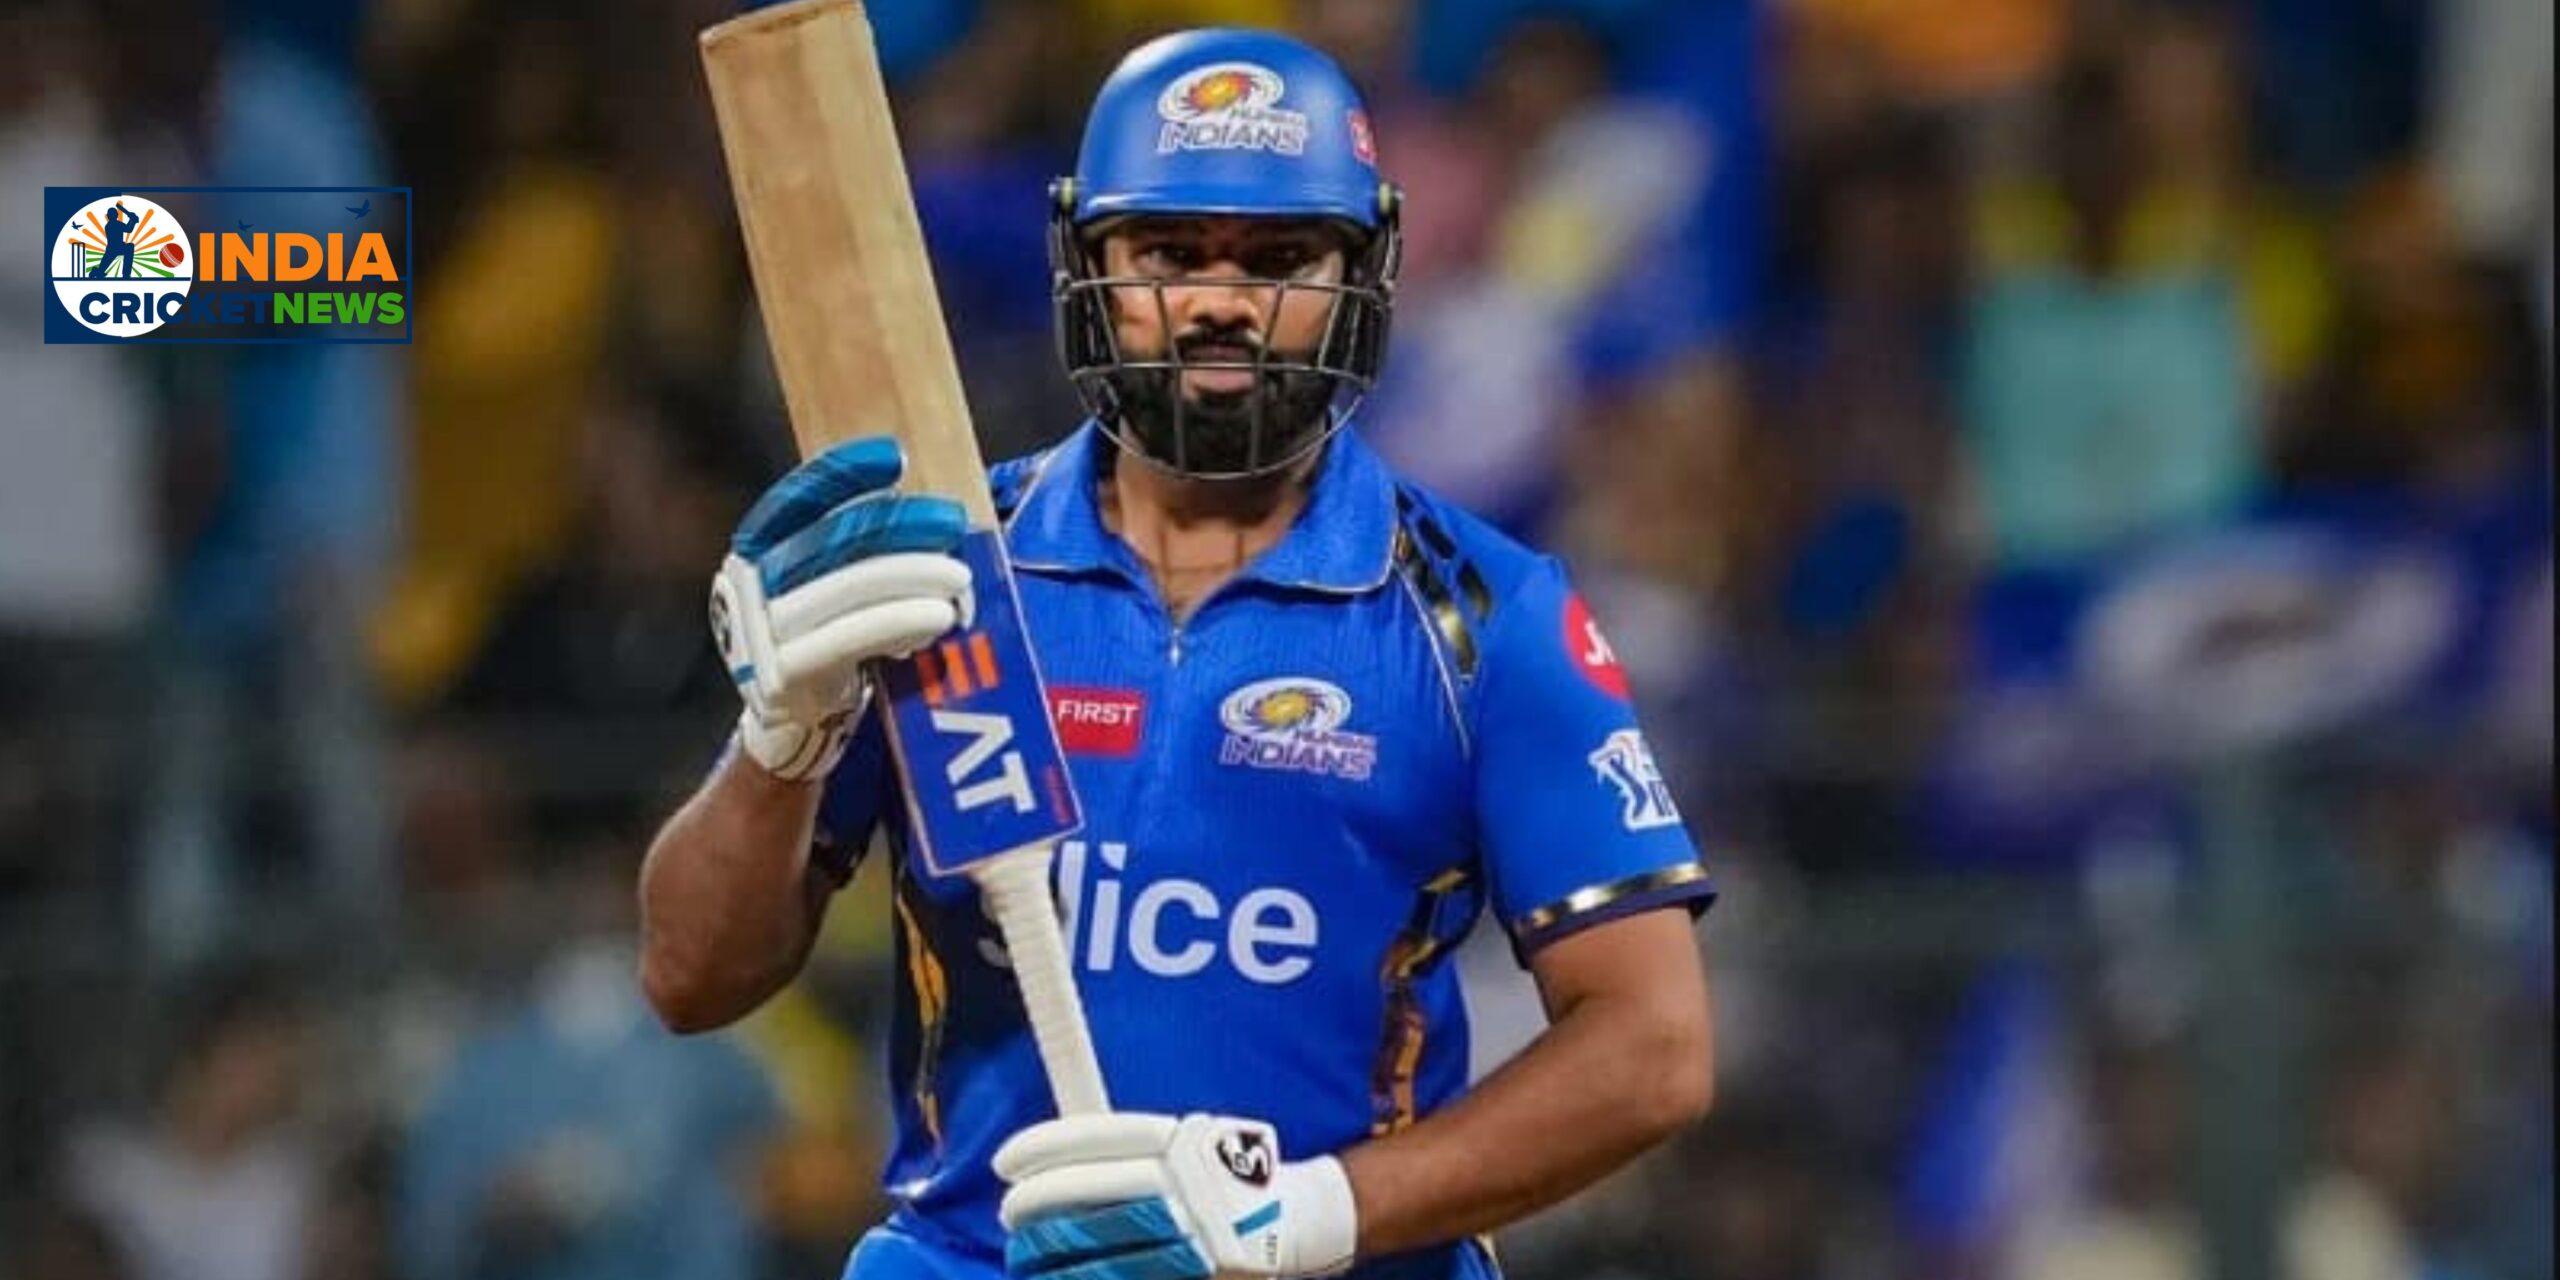 Rohit Sharma: 'Hitman' scripts history, becomes first Asian to smash 500 T20 sixes |